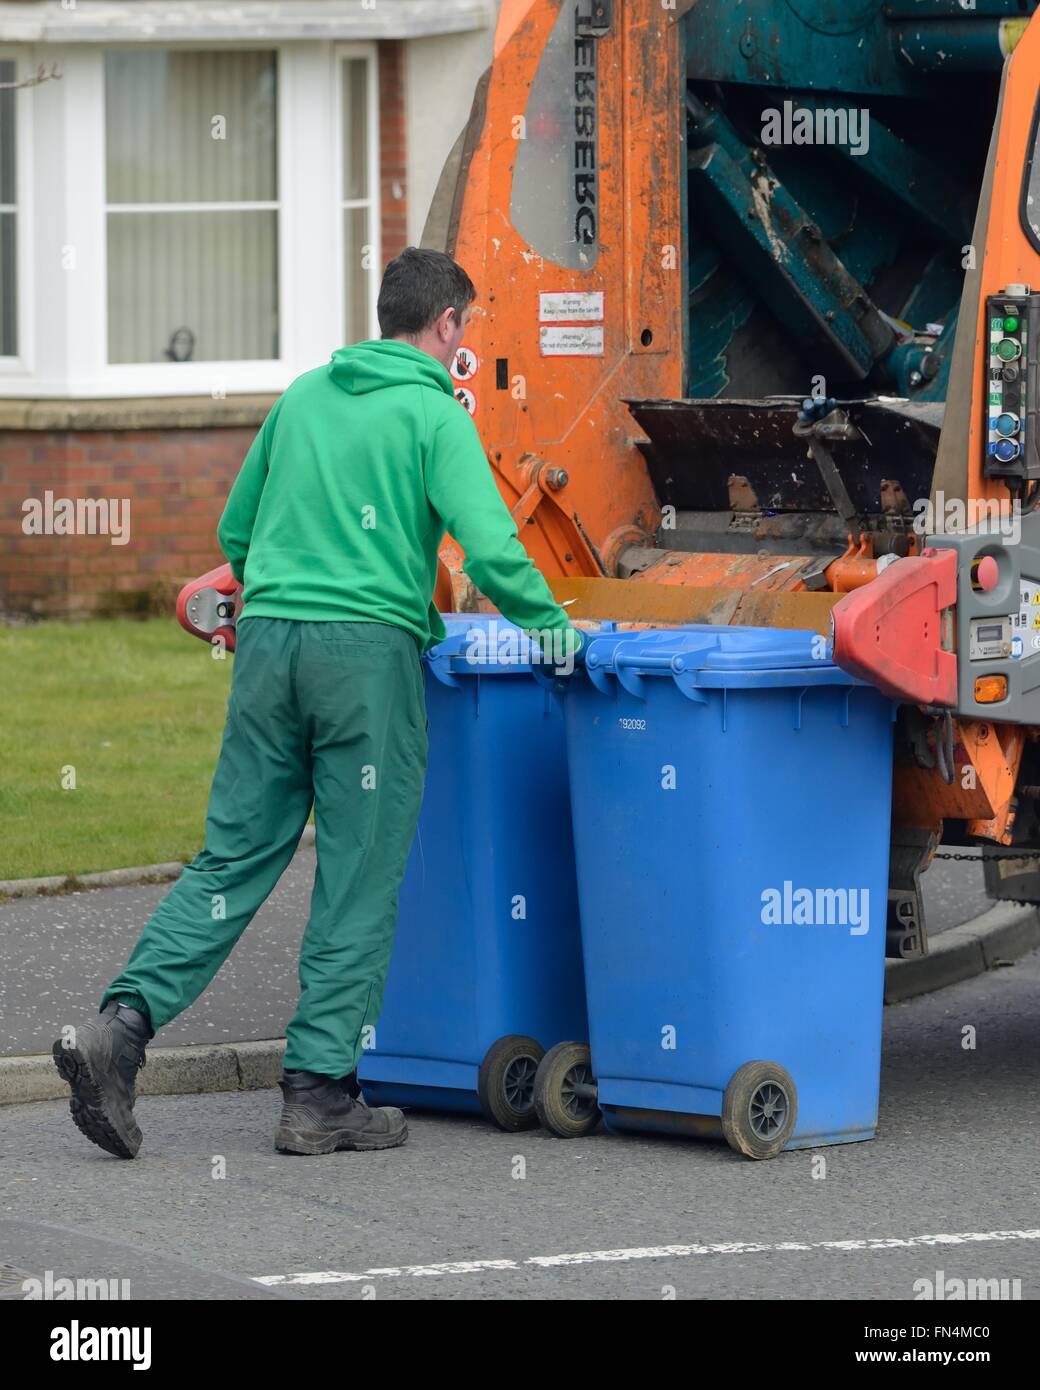 Refuse Collector Stock Photos & Refuse Collector Stock Images - Alamy1040 x 1390